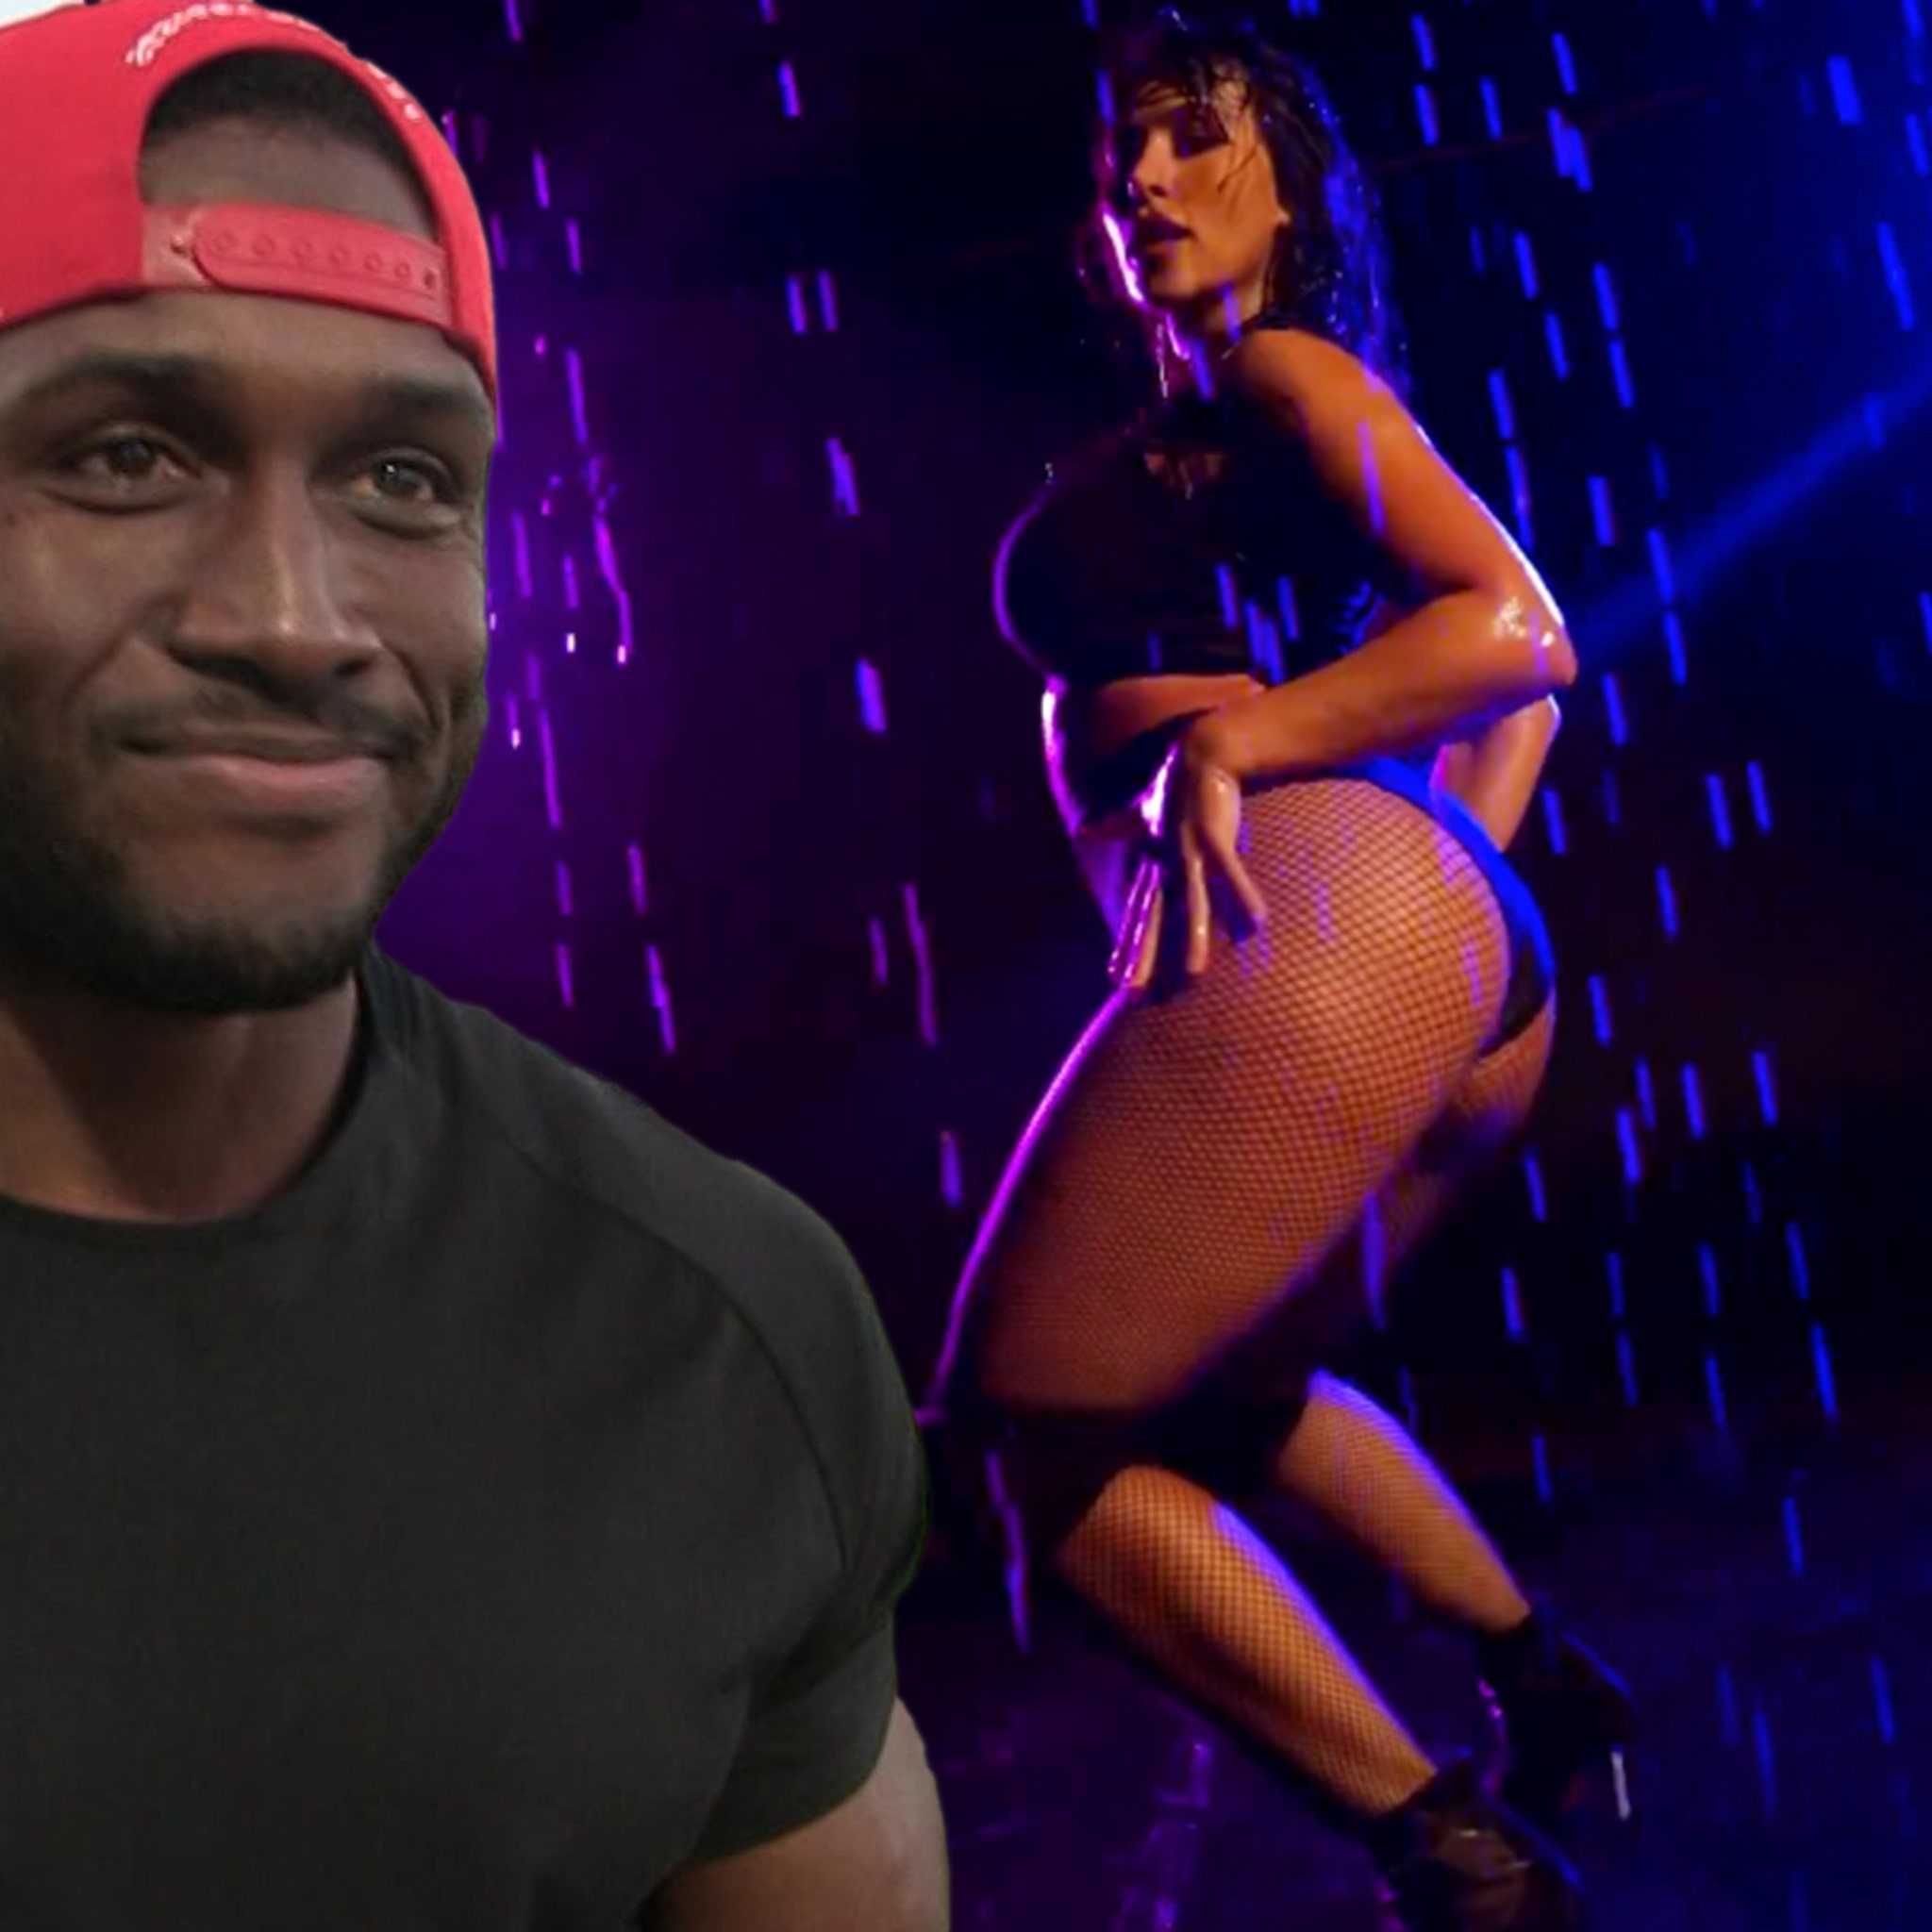 Xxbfsexyvideo - Reggie Bush's Wife Makes Sexy Dance Video In The Rain For His 38th Birthday